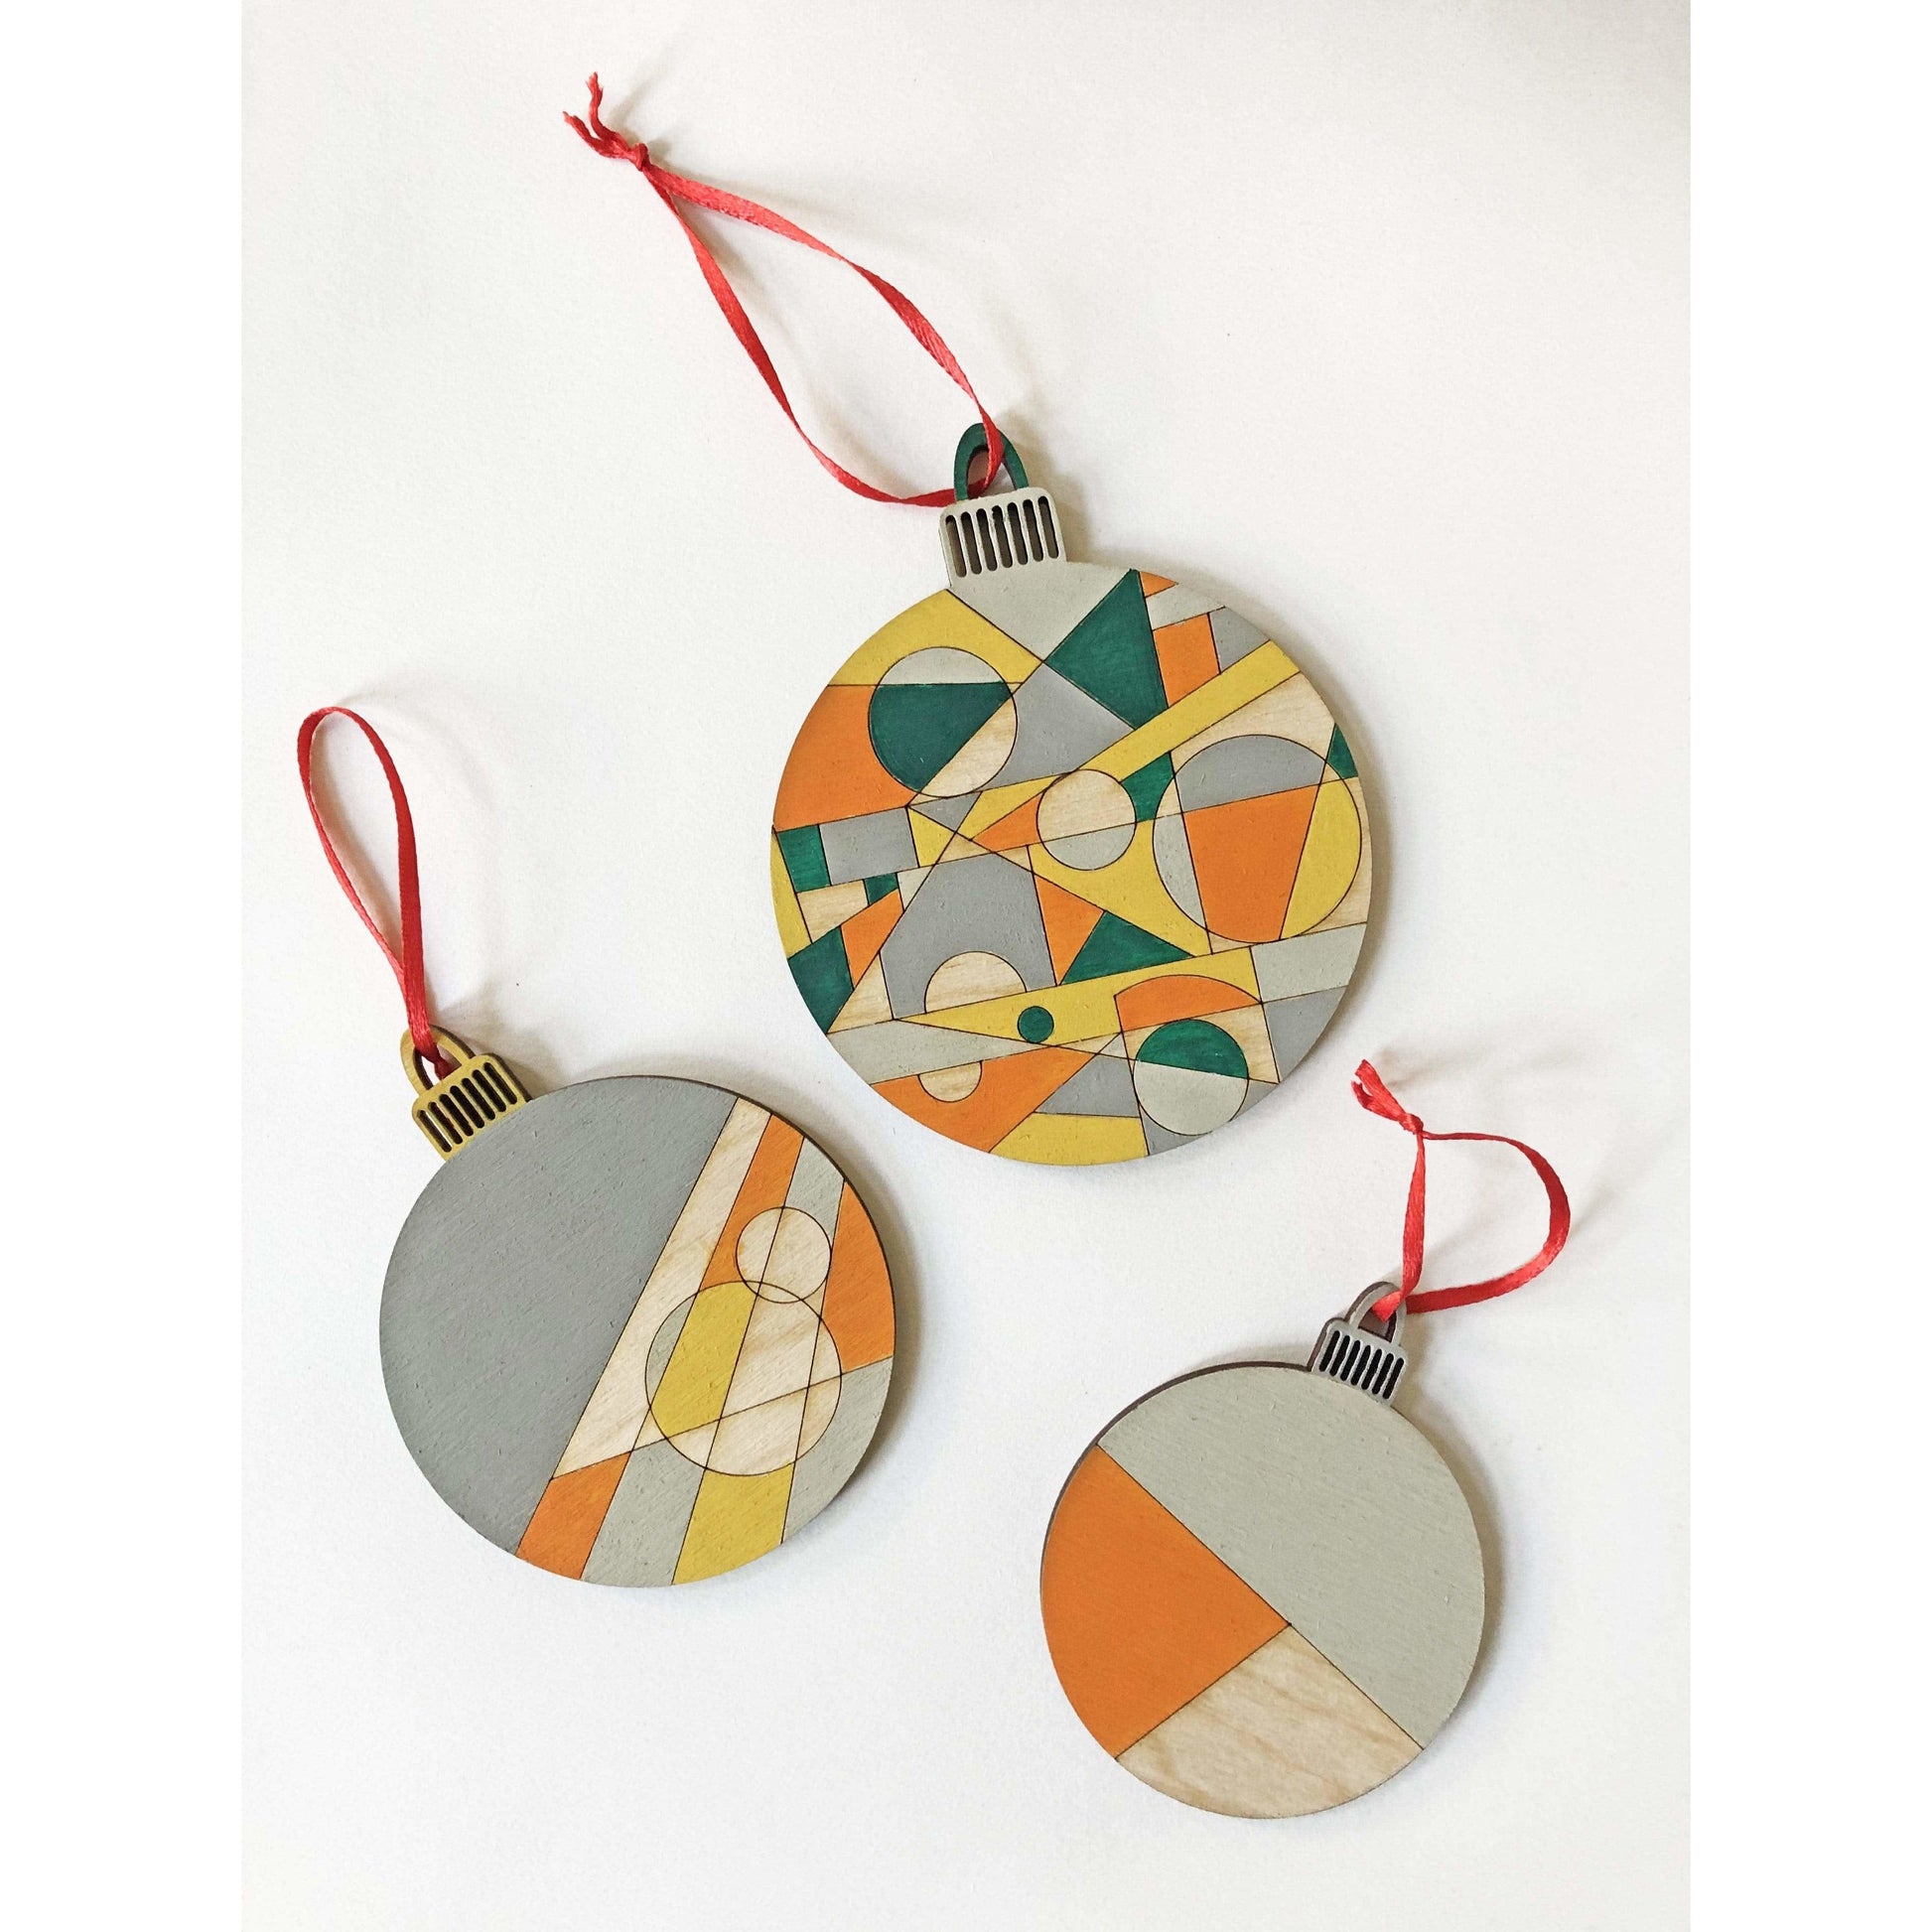 Priormade Kit Christmas Baubles Kit - pack of 6 wooden baubles